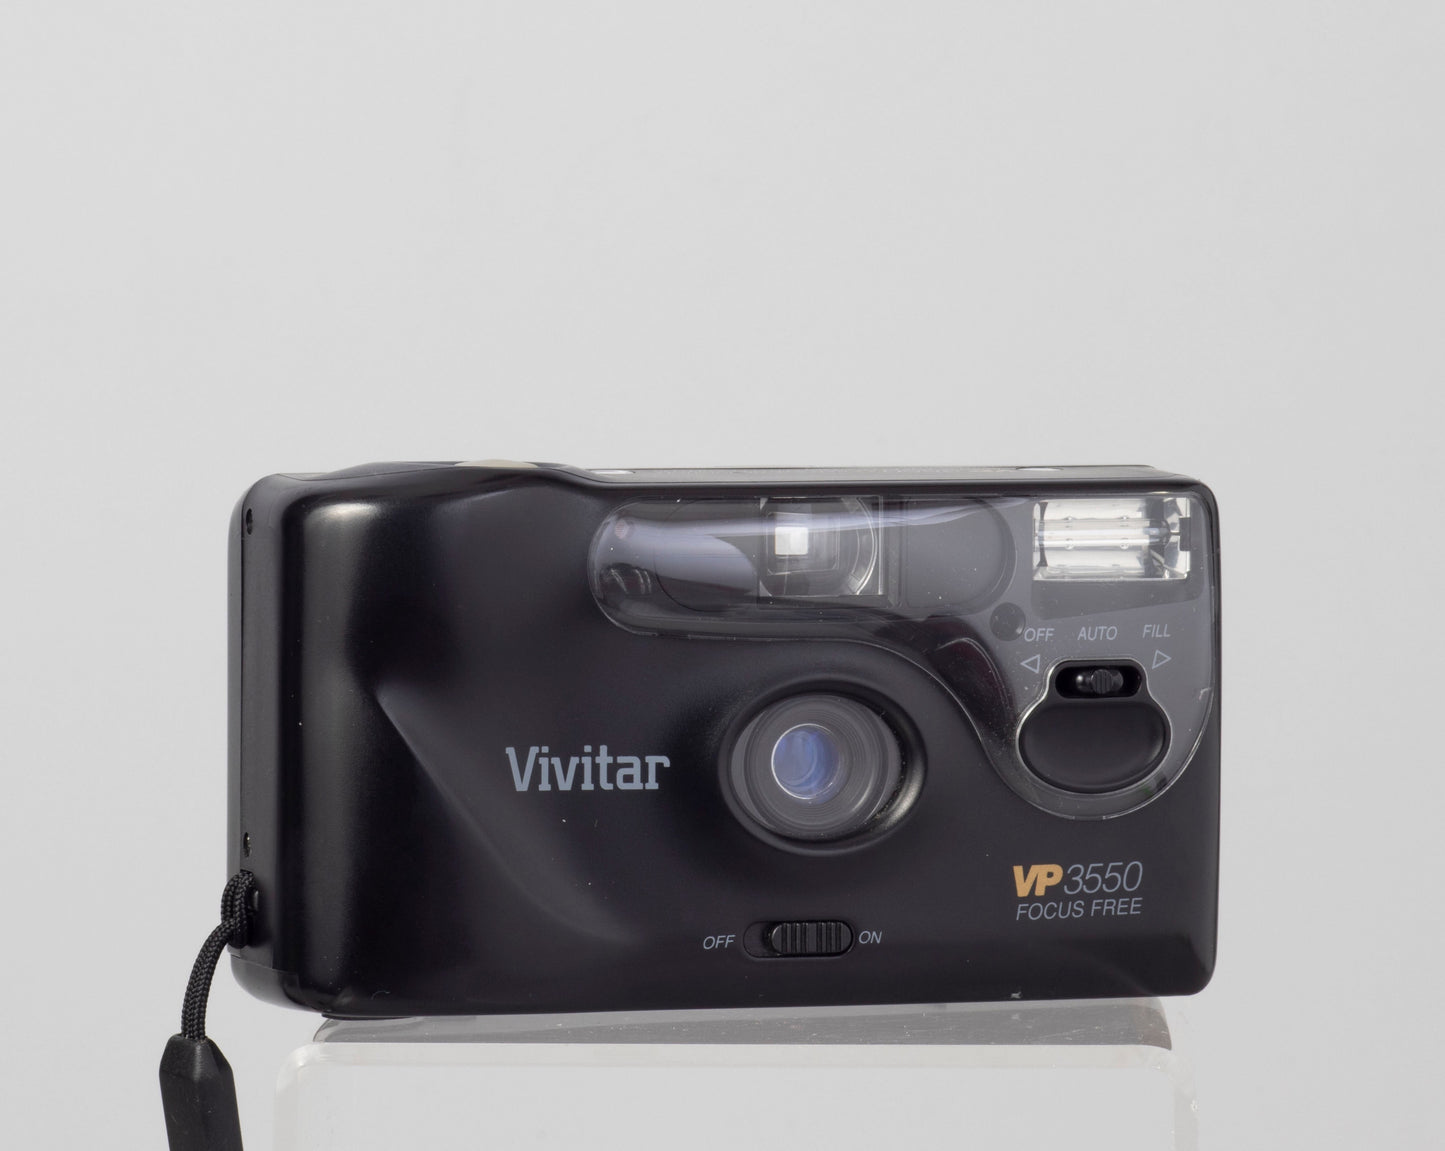 The Vivitar VP3550 is a simple focus free point-and-shoot camera from the 1990s